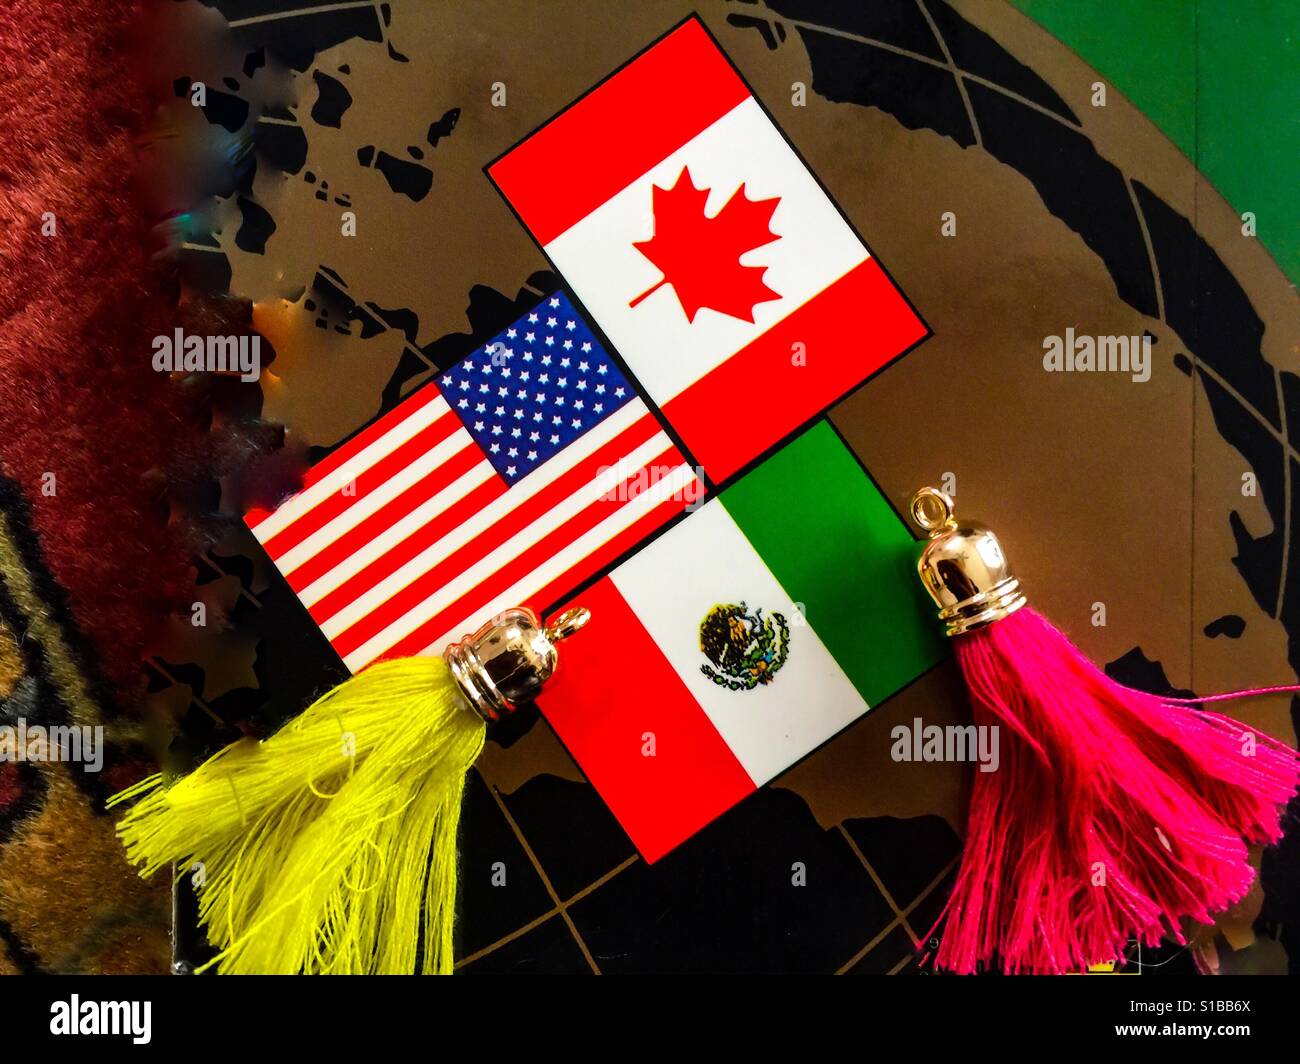 The world of NAFTA, USMCA now, three countries three flags in an iconic arrangement. The Maple Leaf, the Stars and Stripes, and the Mexican flag arranged harmoniously. No discord or  friction. Design Stock Photo